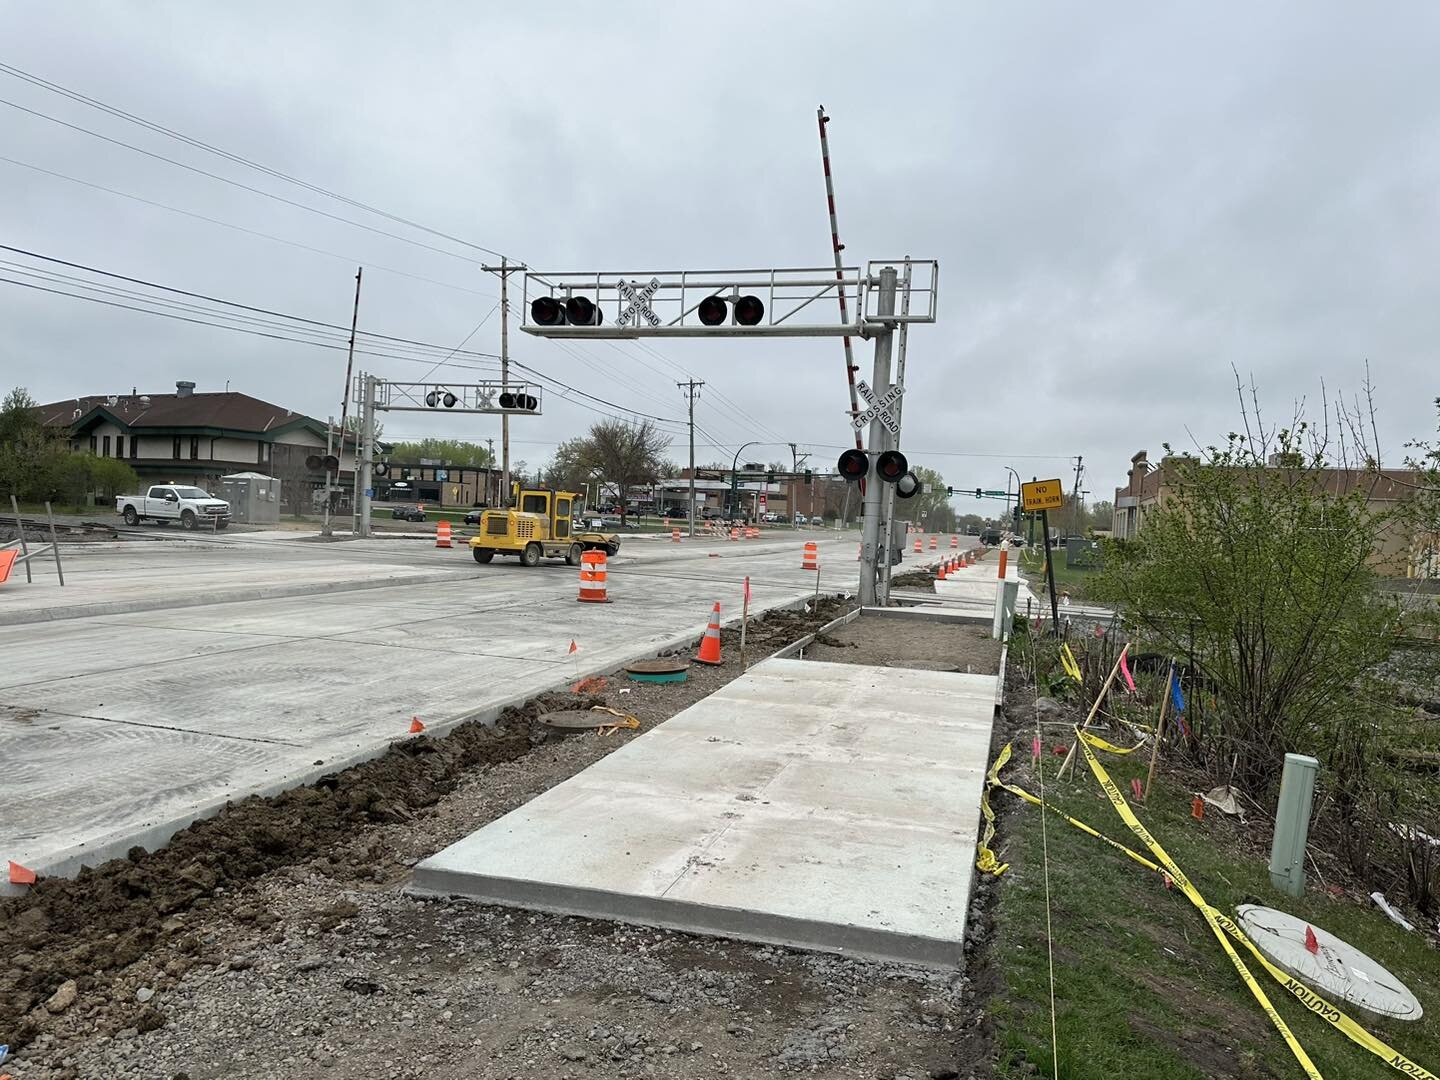 Road Construction Update 🚧

Oh happy day! We have one lane each way opened at County Road E 👏🏻

As a reminder, plan ahead when coming into our shop and don&rsquo;t hesitate to give us a call at (651) 636-1312 if you have any questions!